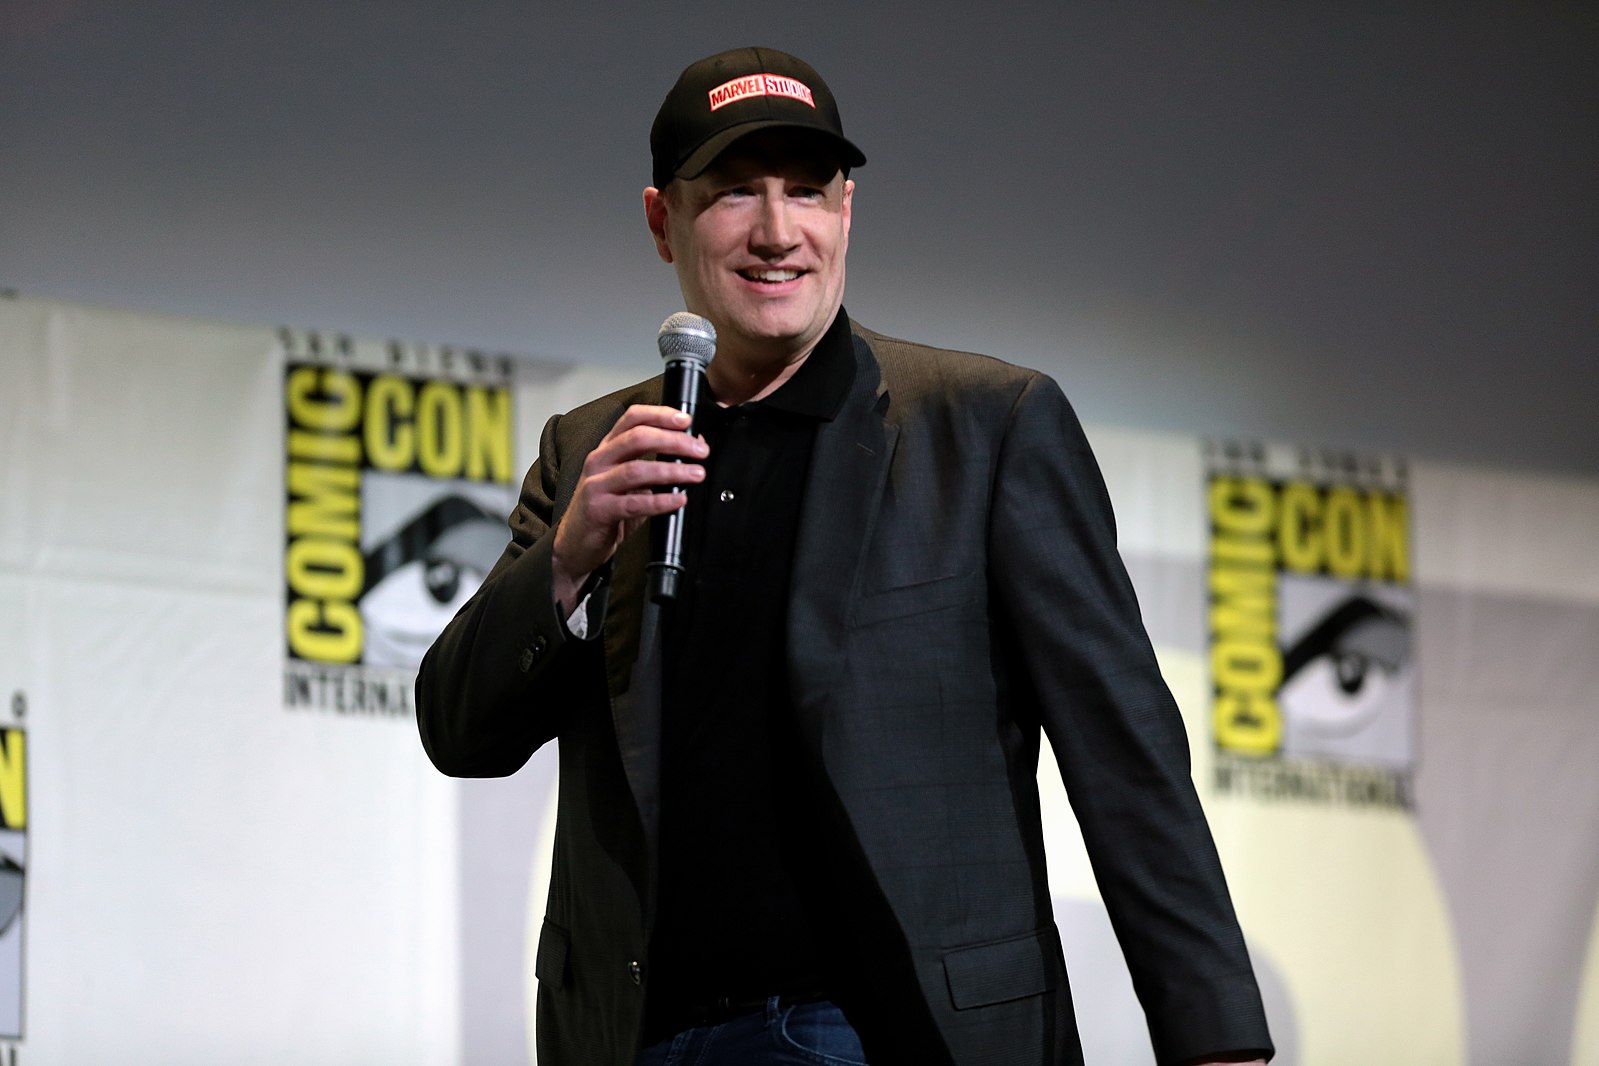 Marvel Cinematic Multiverse Rules Defined At Meeting Says Feige